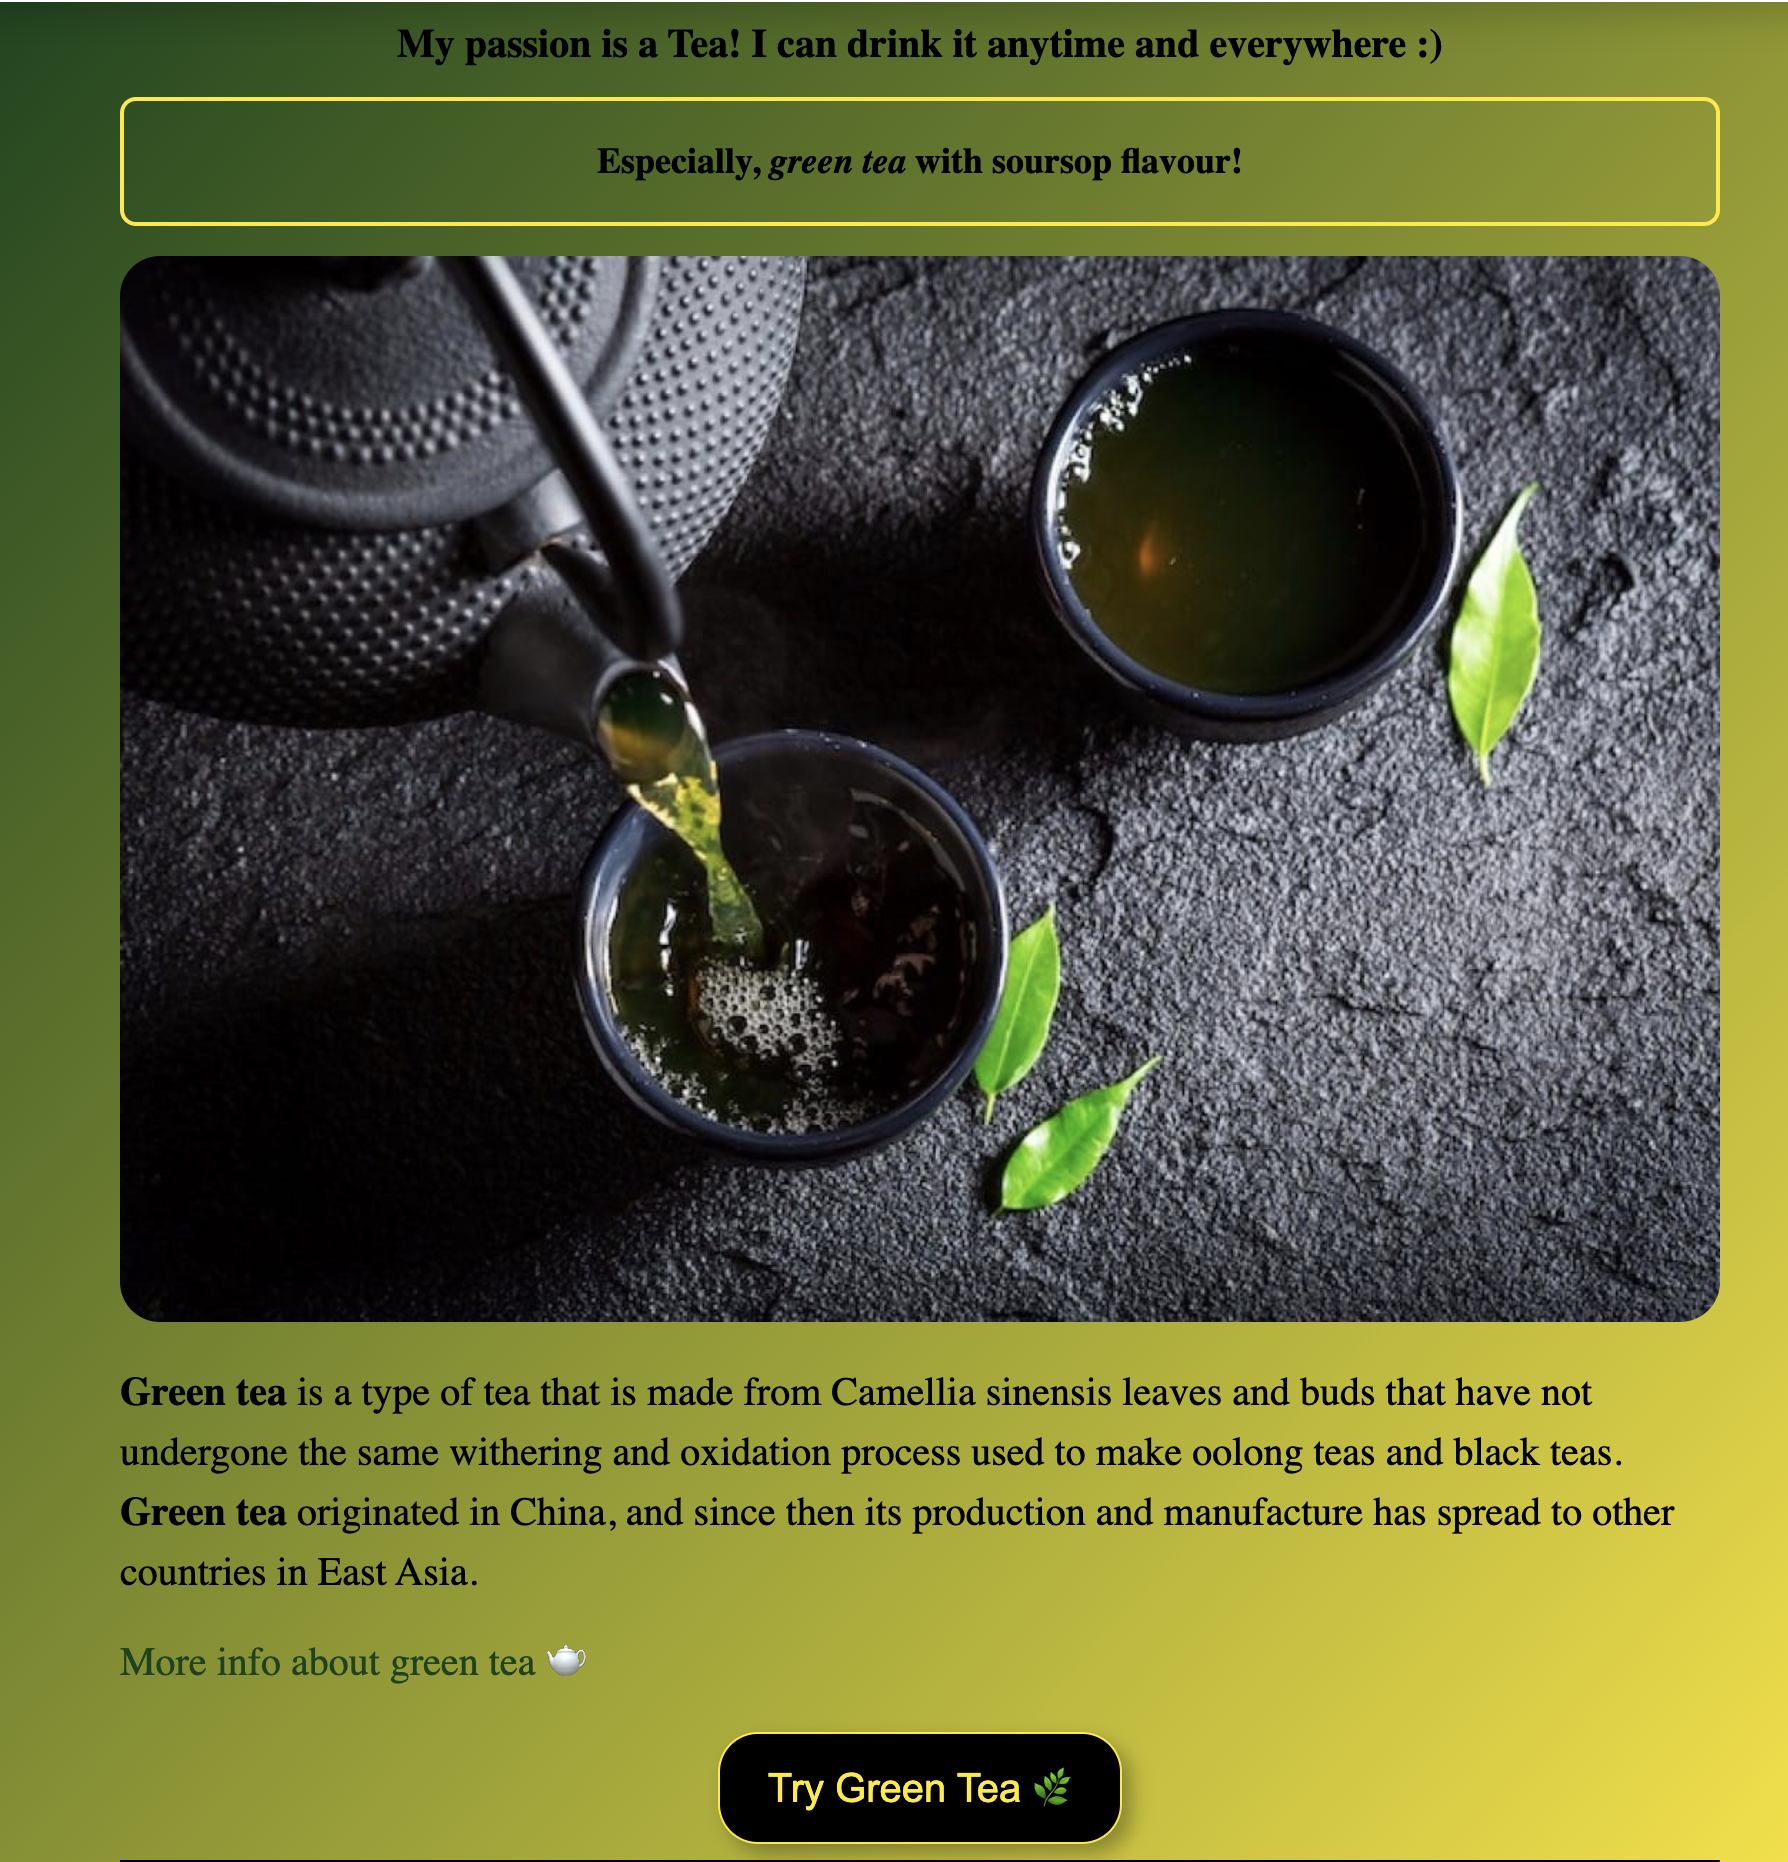 Landing page about green tea